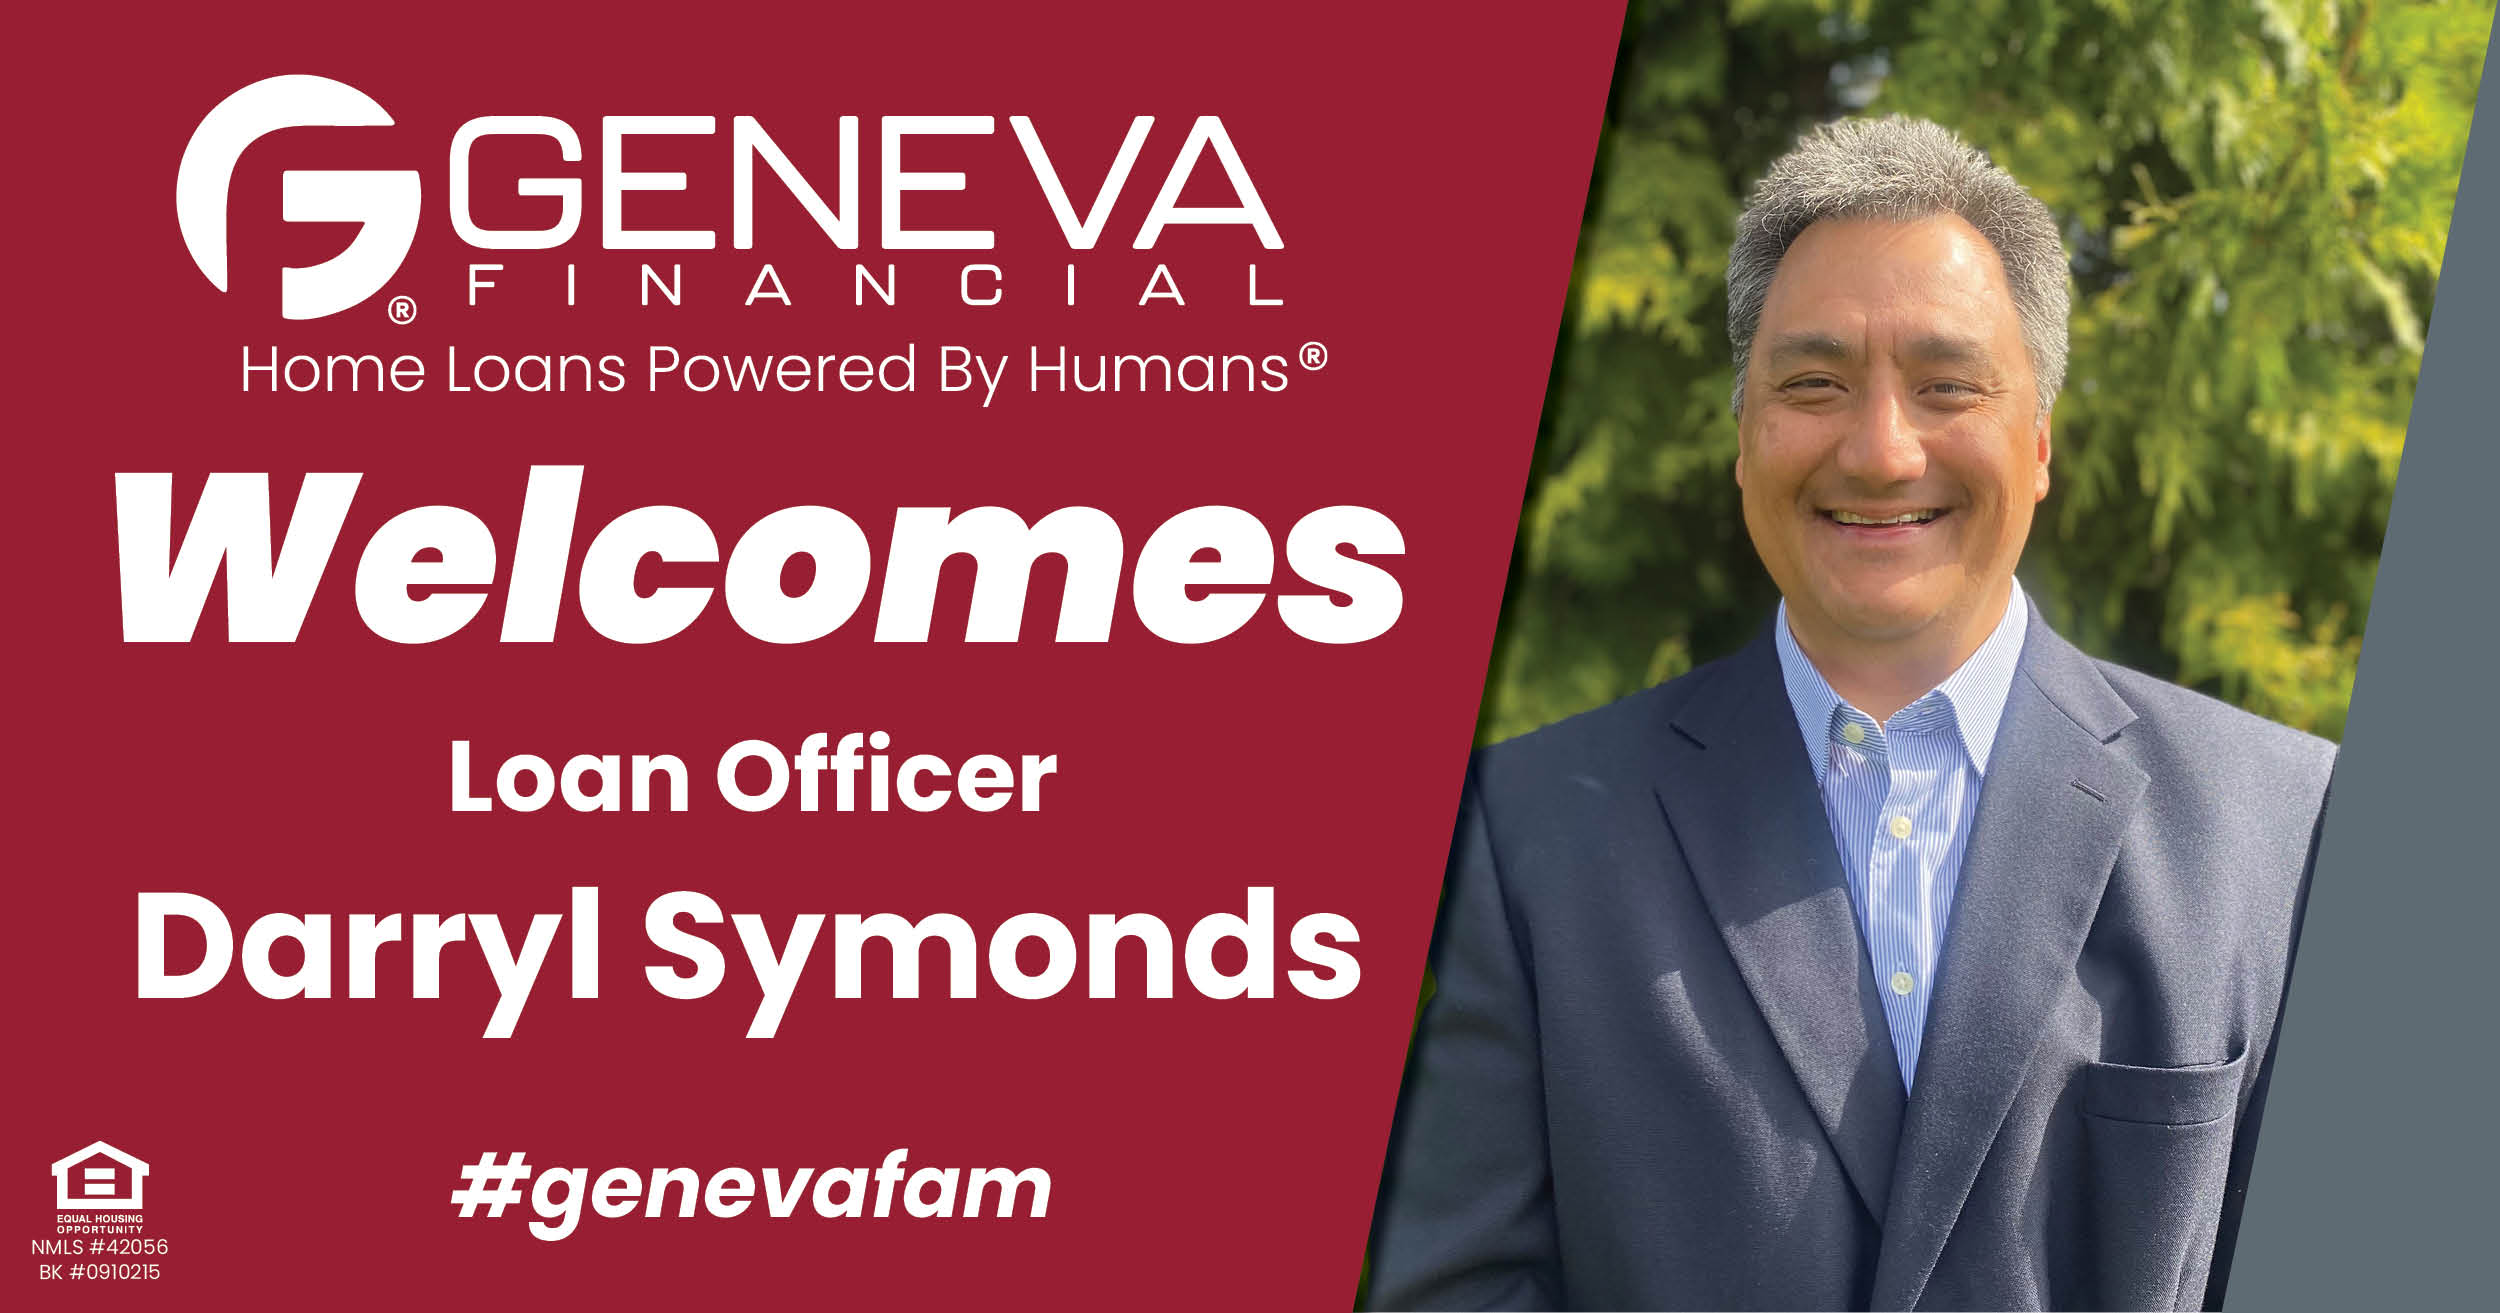 Geneva Financial Welcomes New Loan Officer Darryl Symonds to Lake Oswego, Oregon – Home Loans Powered by Humans®.